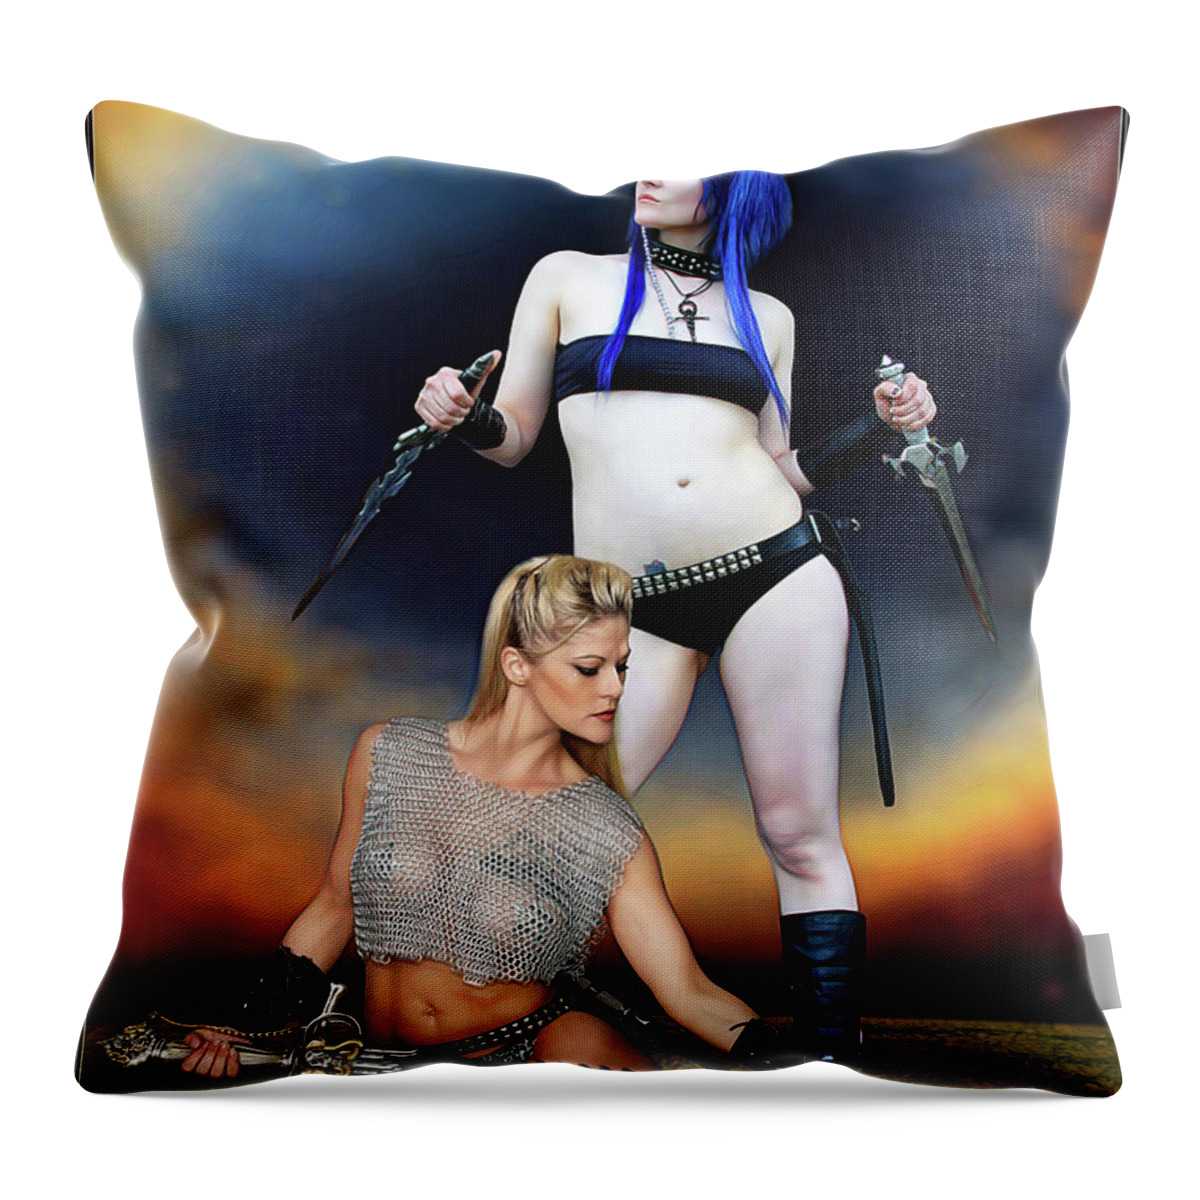 Fantasy Throw Pillow featuring the photograph Amazon Of Sky God by Jon Volden